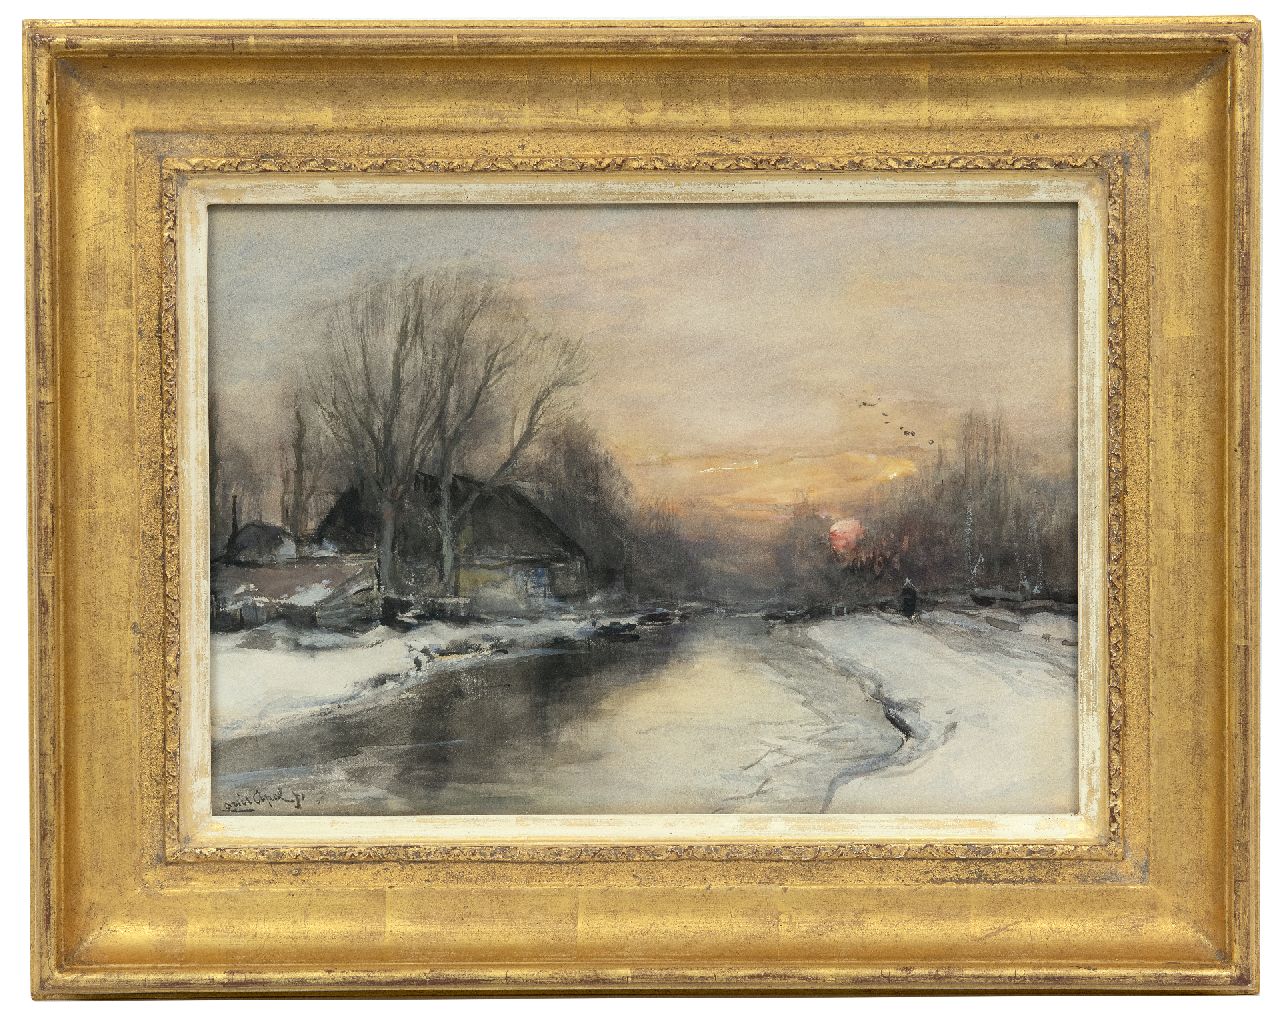 Apol L.F.H.  | Lodewijk Franciscus Hendrik 'Louis' Apol, A snowy riverbank at sunset, watercolour on paper 25.3 x 35.4 cm, signed l.l.